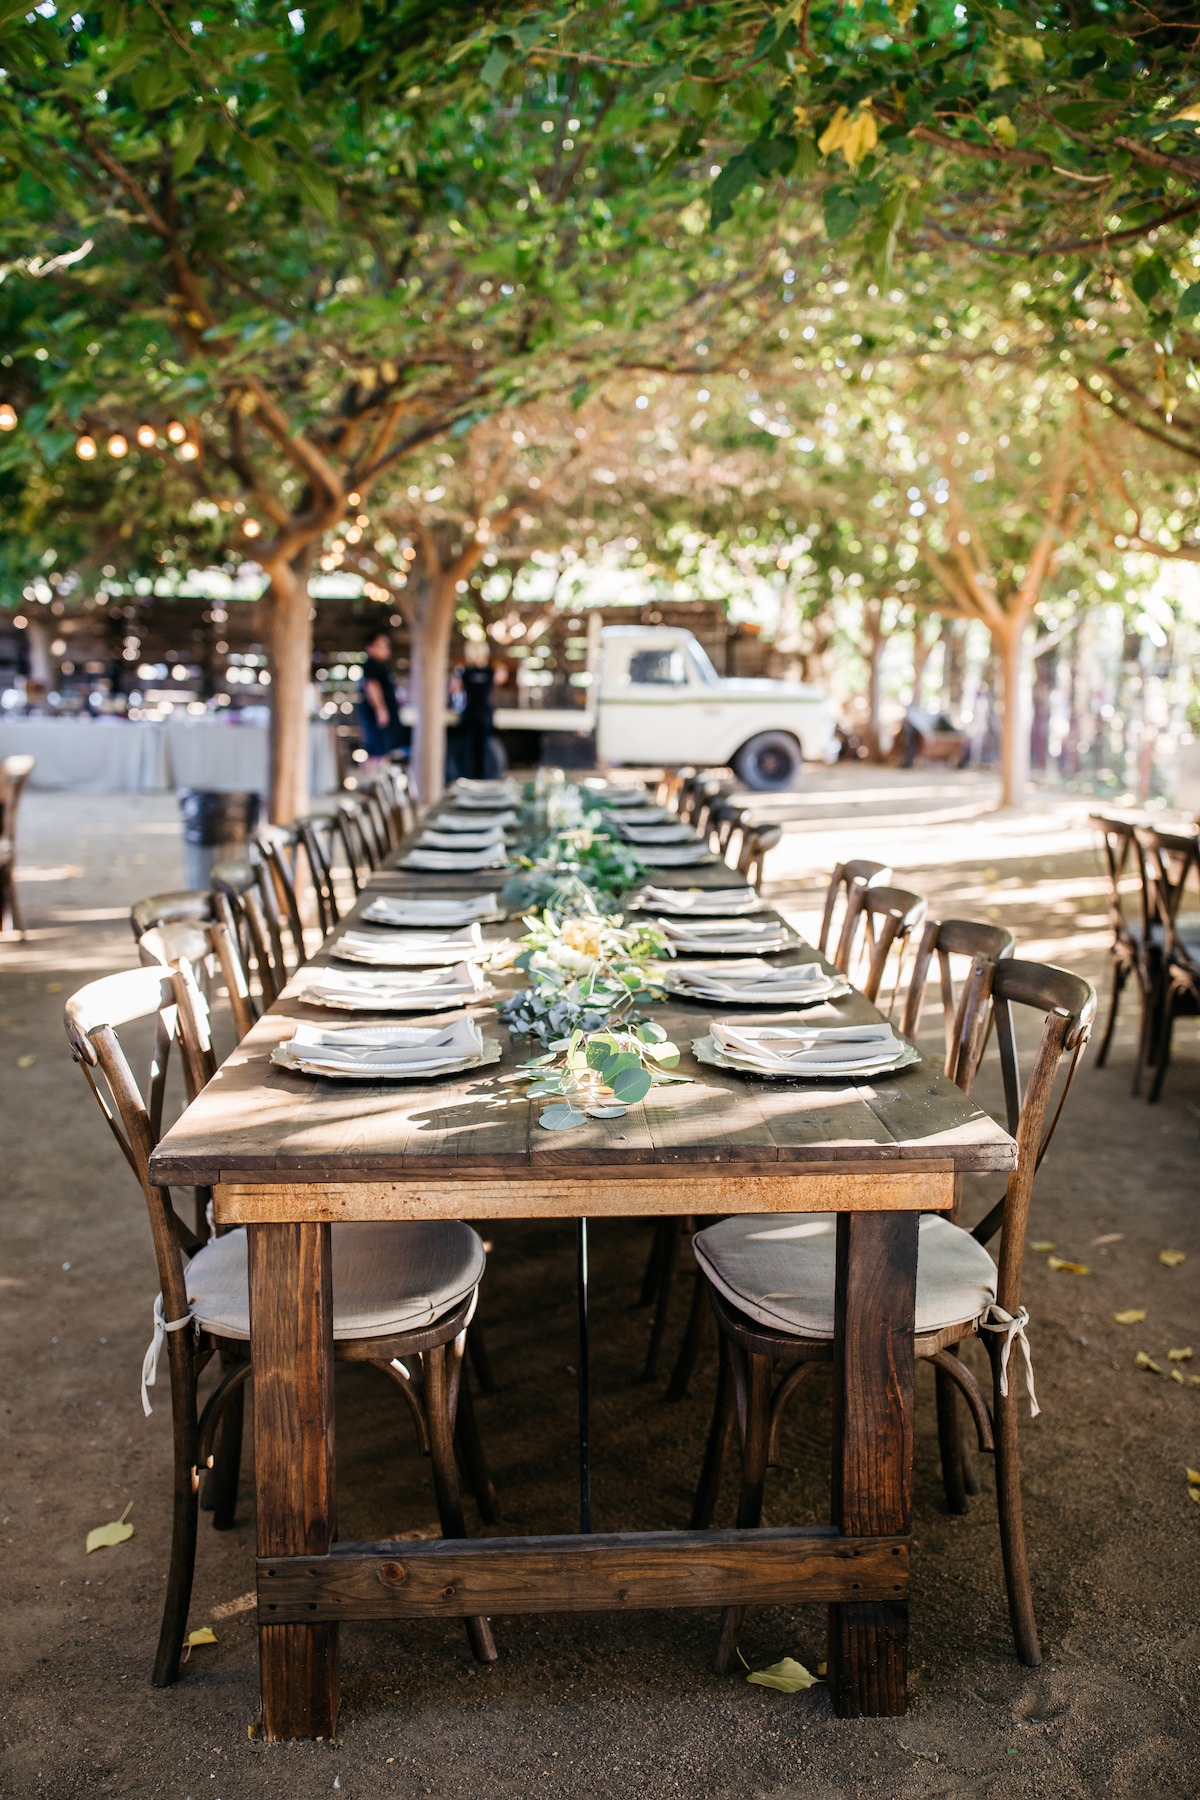 Peltzer Winery Outdoor Reception Tablescape